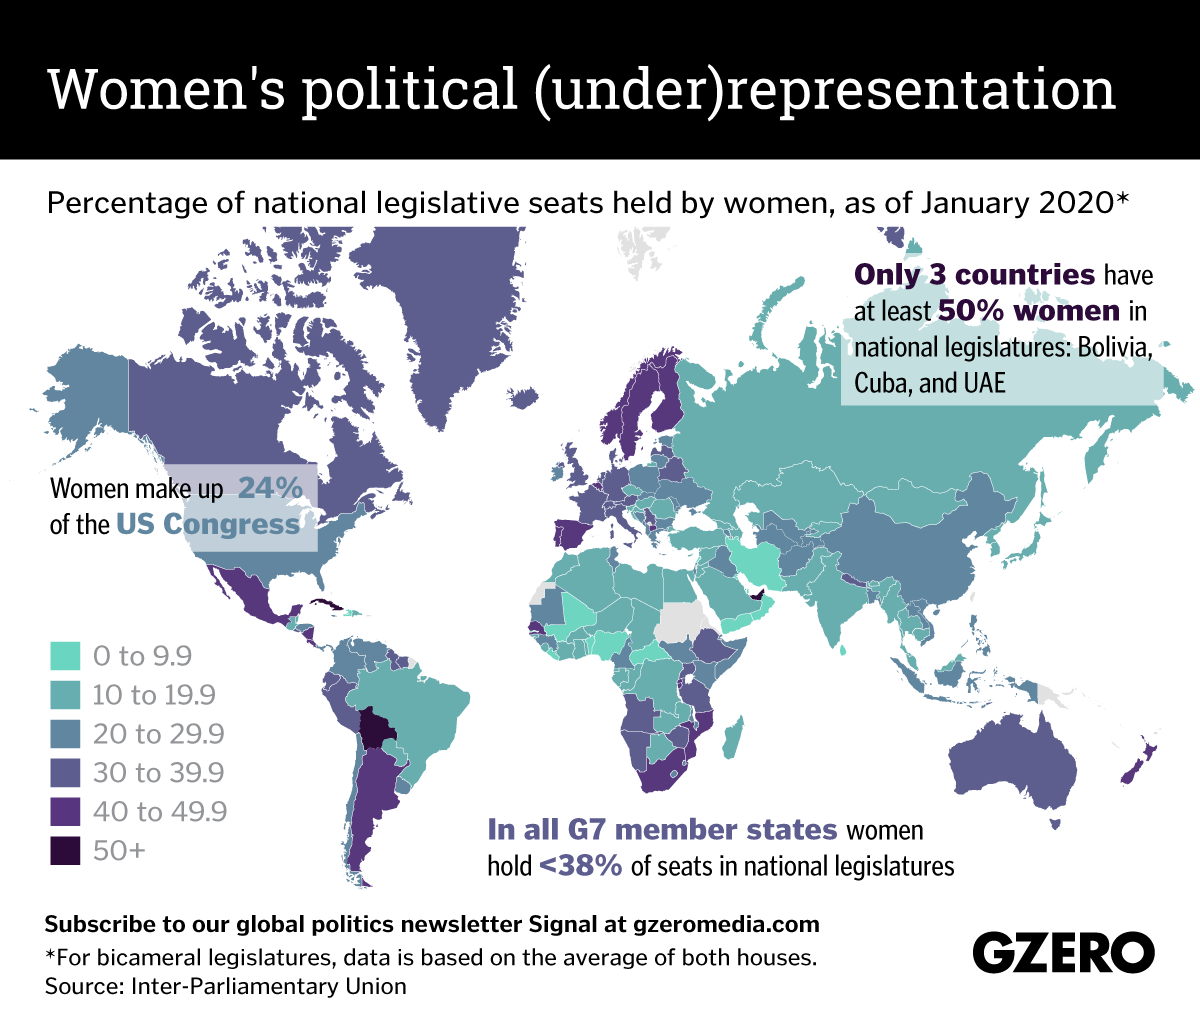 Women in Politics: Why Are They Under-represented? • FREE NETWORK